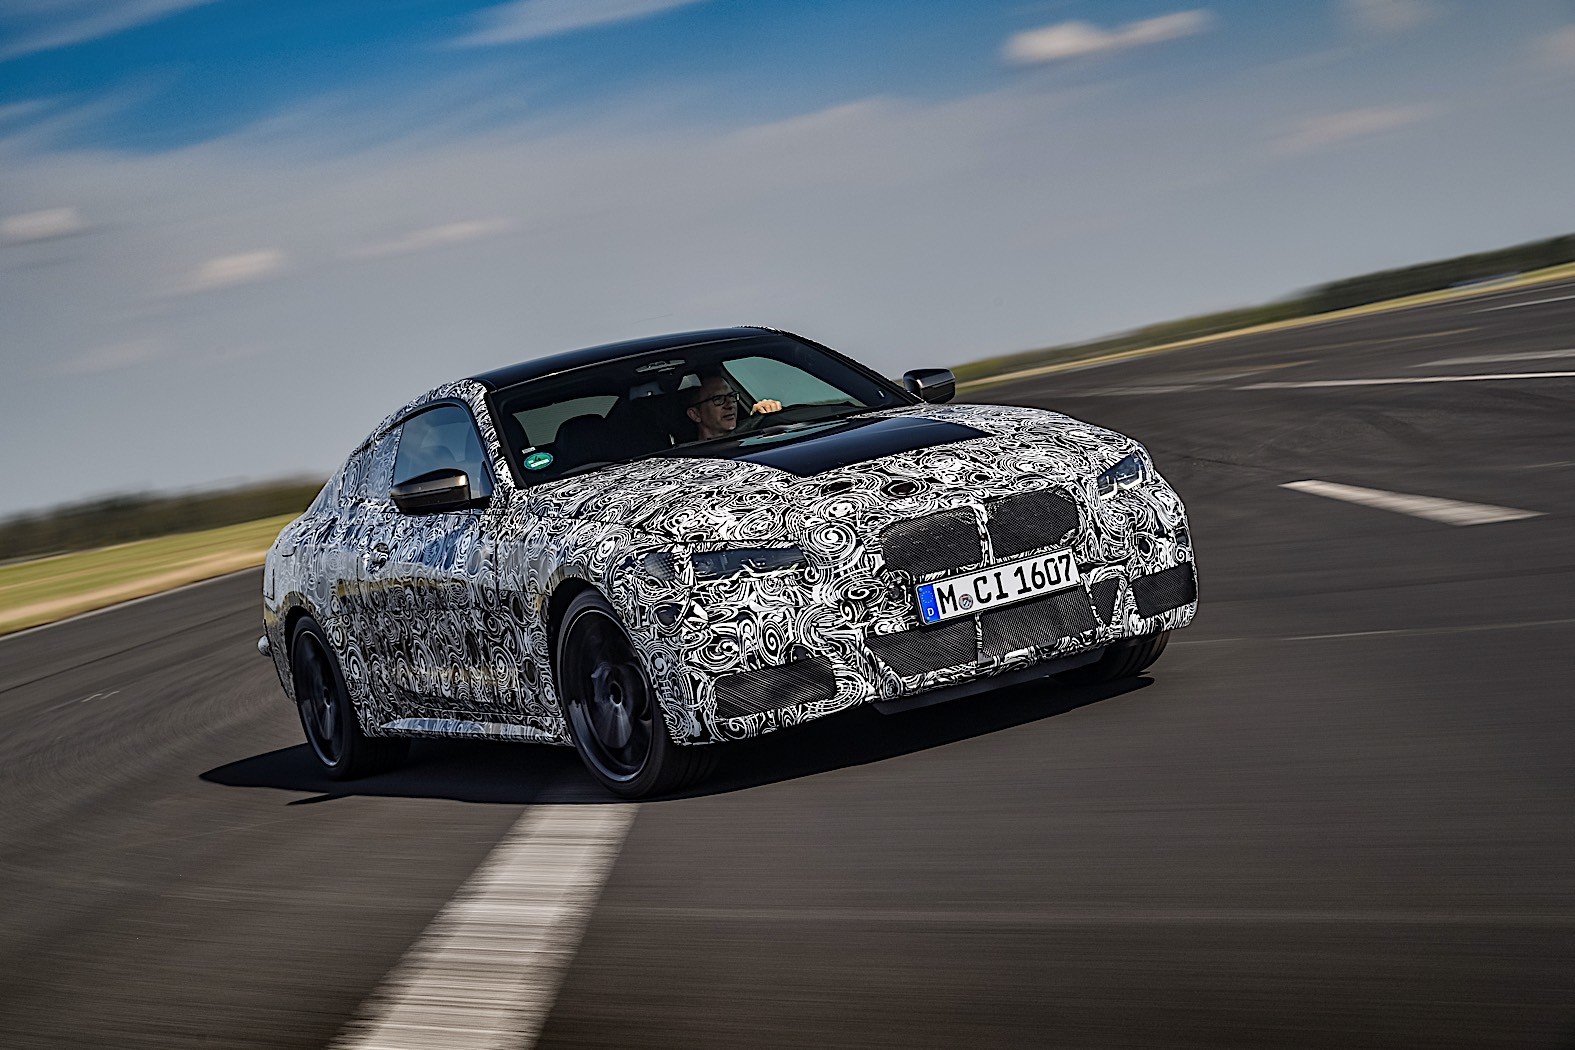 The 2021 BMW 4 Series: The Ultimate Driving Machine